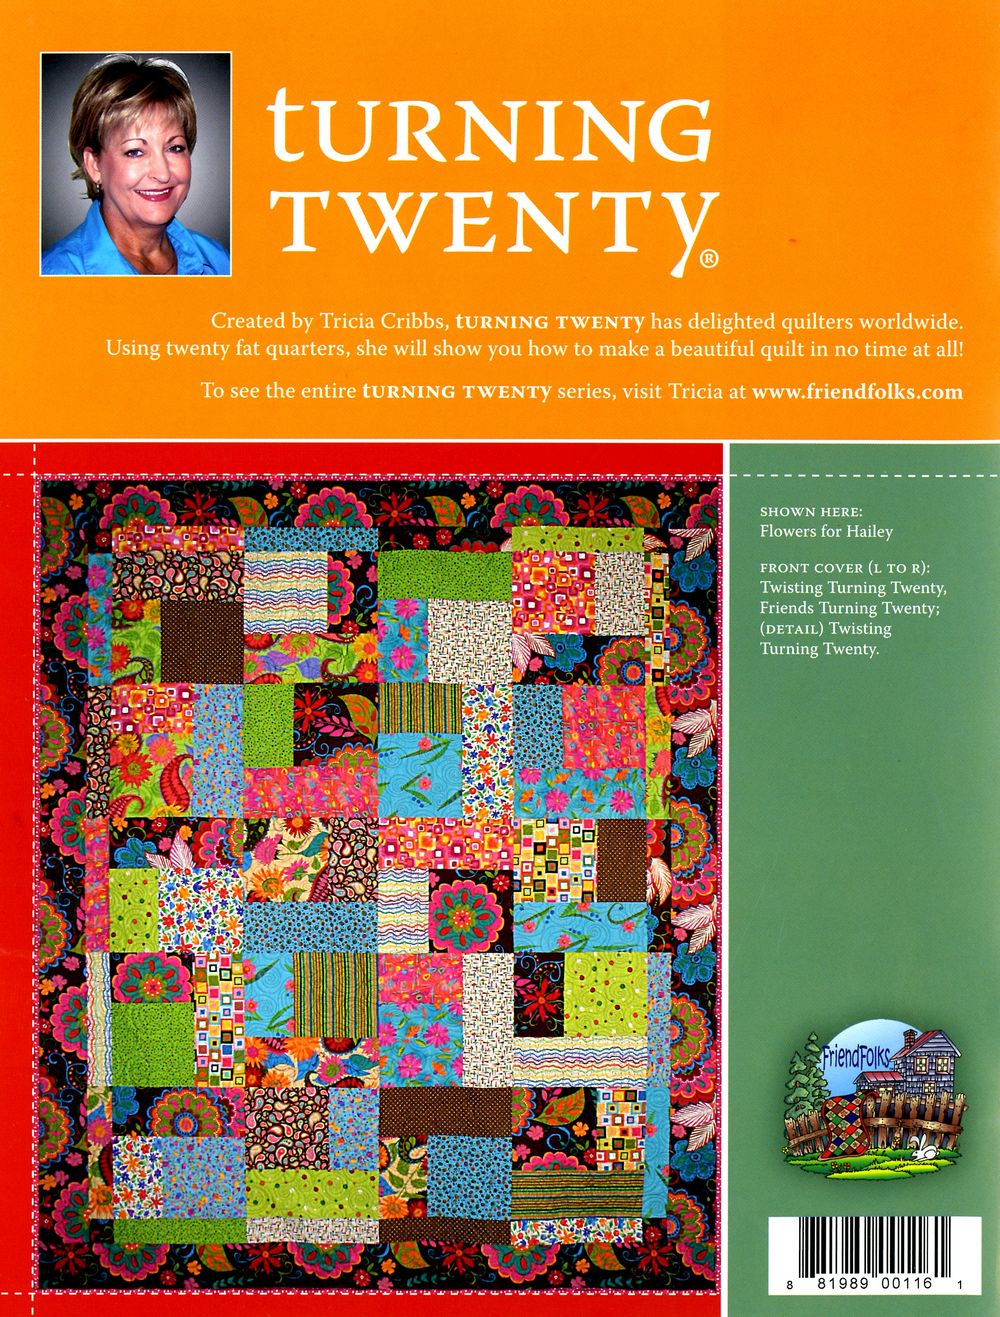 Turning Twenty Just Got Better Quilt Pattern Book by Tricia Cribbs of Friendfolks